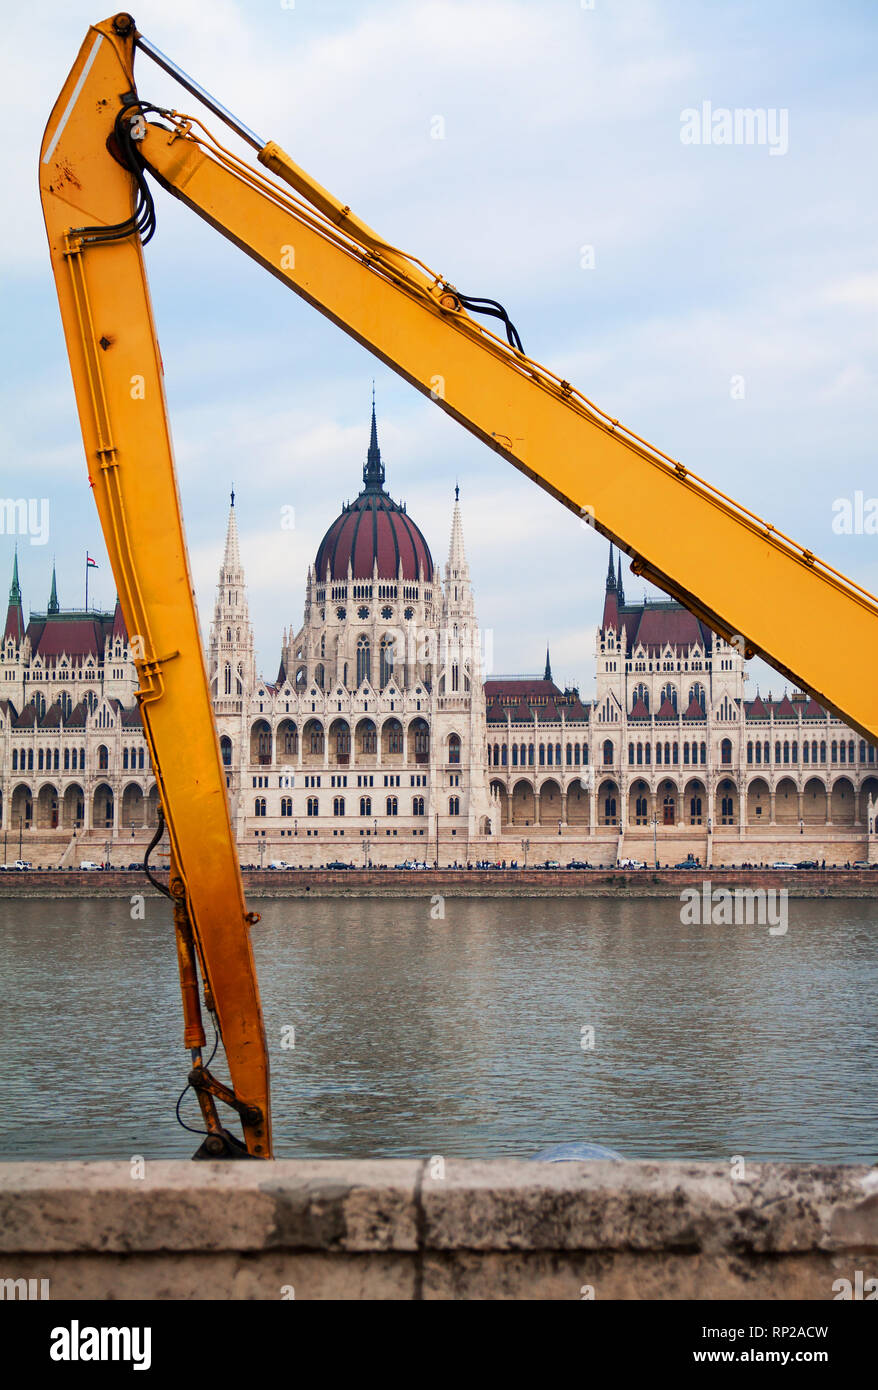 Parlament building in Budapest framed with yellow grabber arms on river Danube. Stock Photo